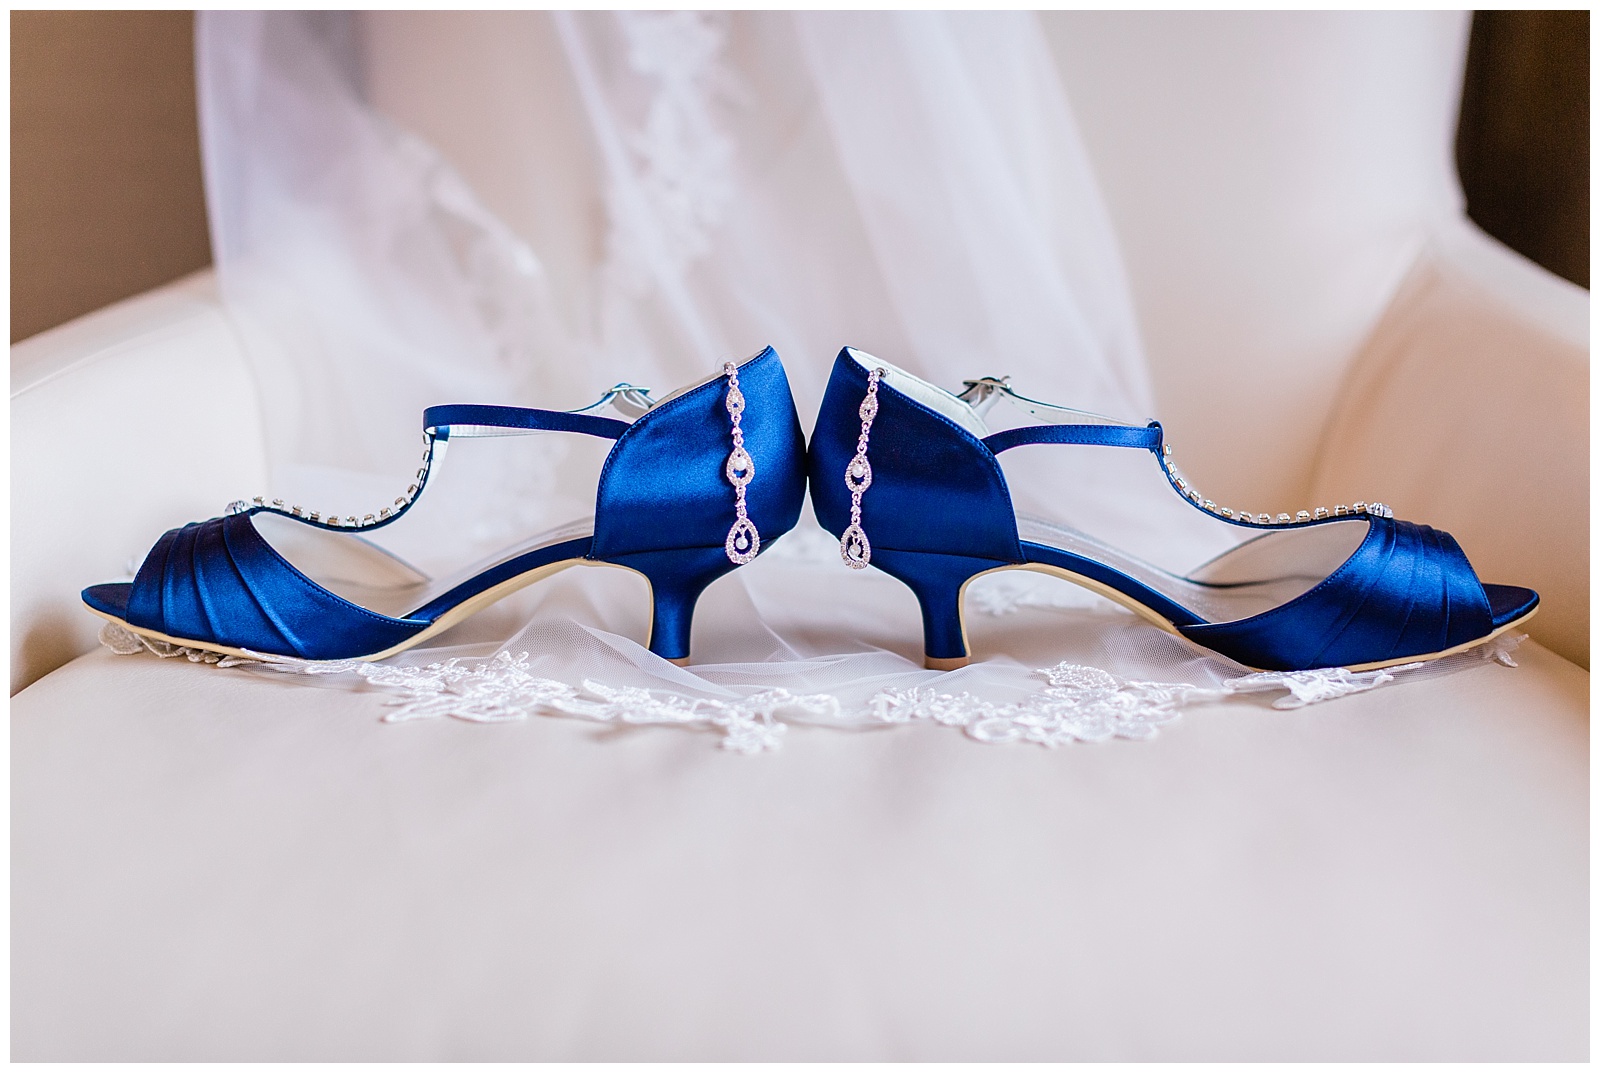 Bridal shoes and earrings sitting on veil for Fairlane Club Fall Wedding